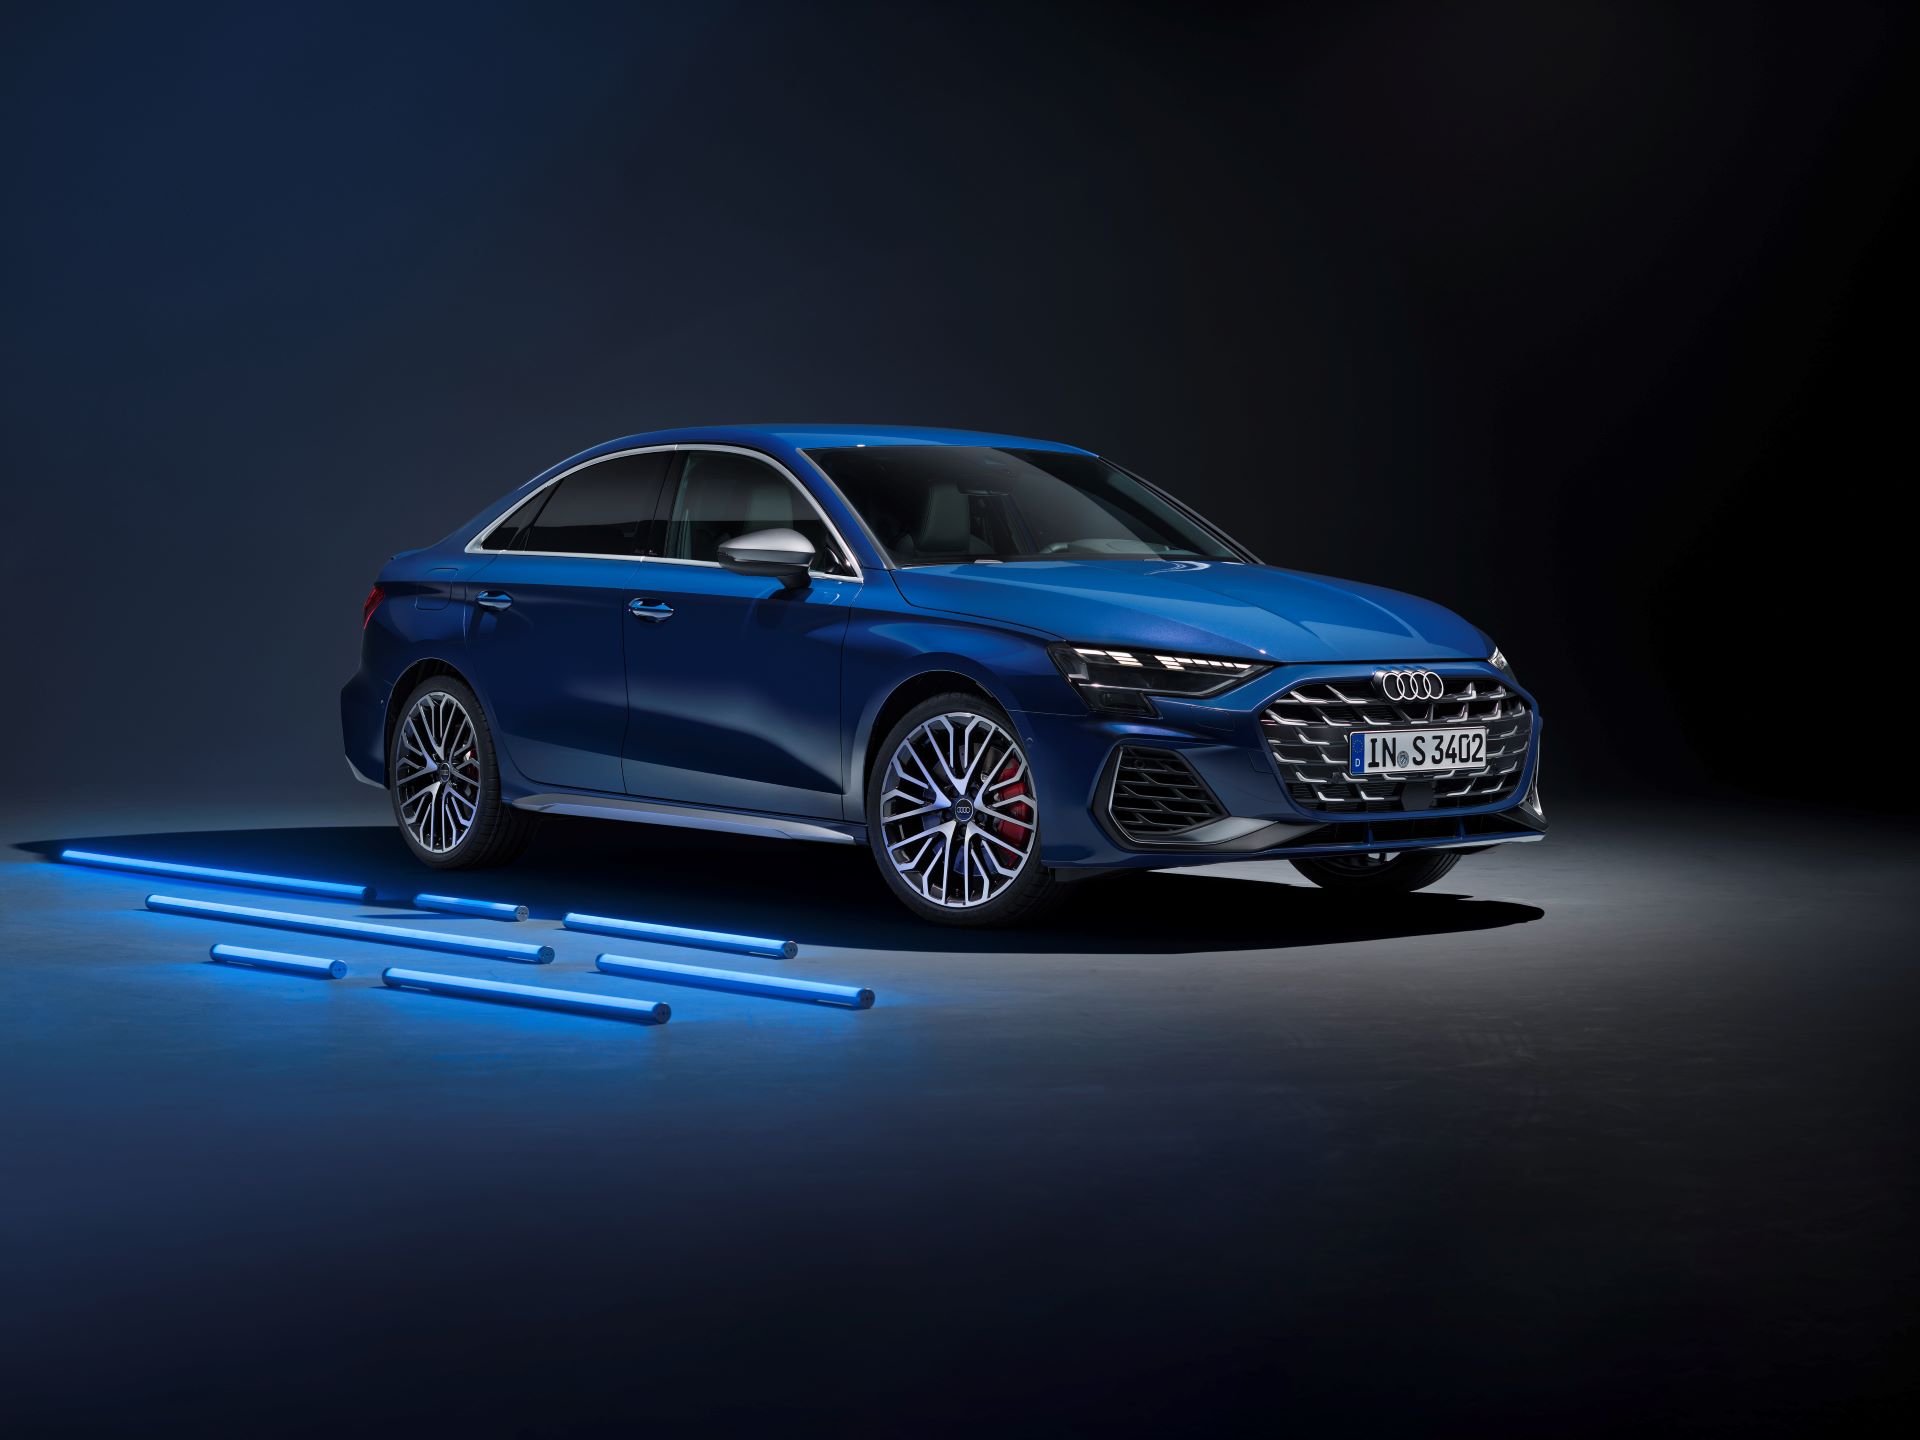 High-performance, agile, expressive: the new Audi S3